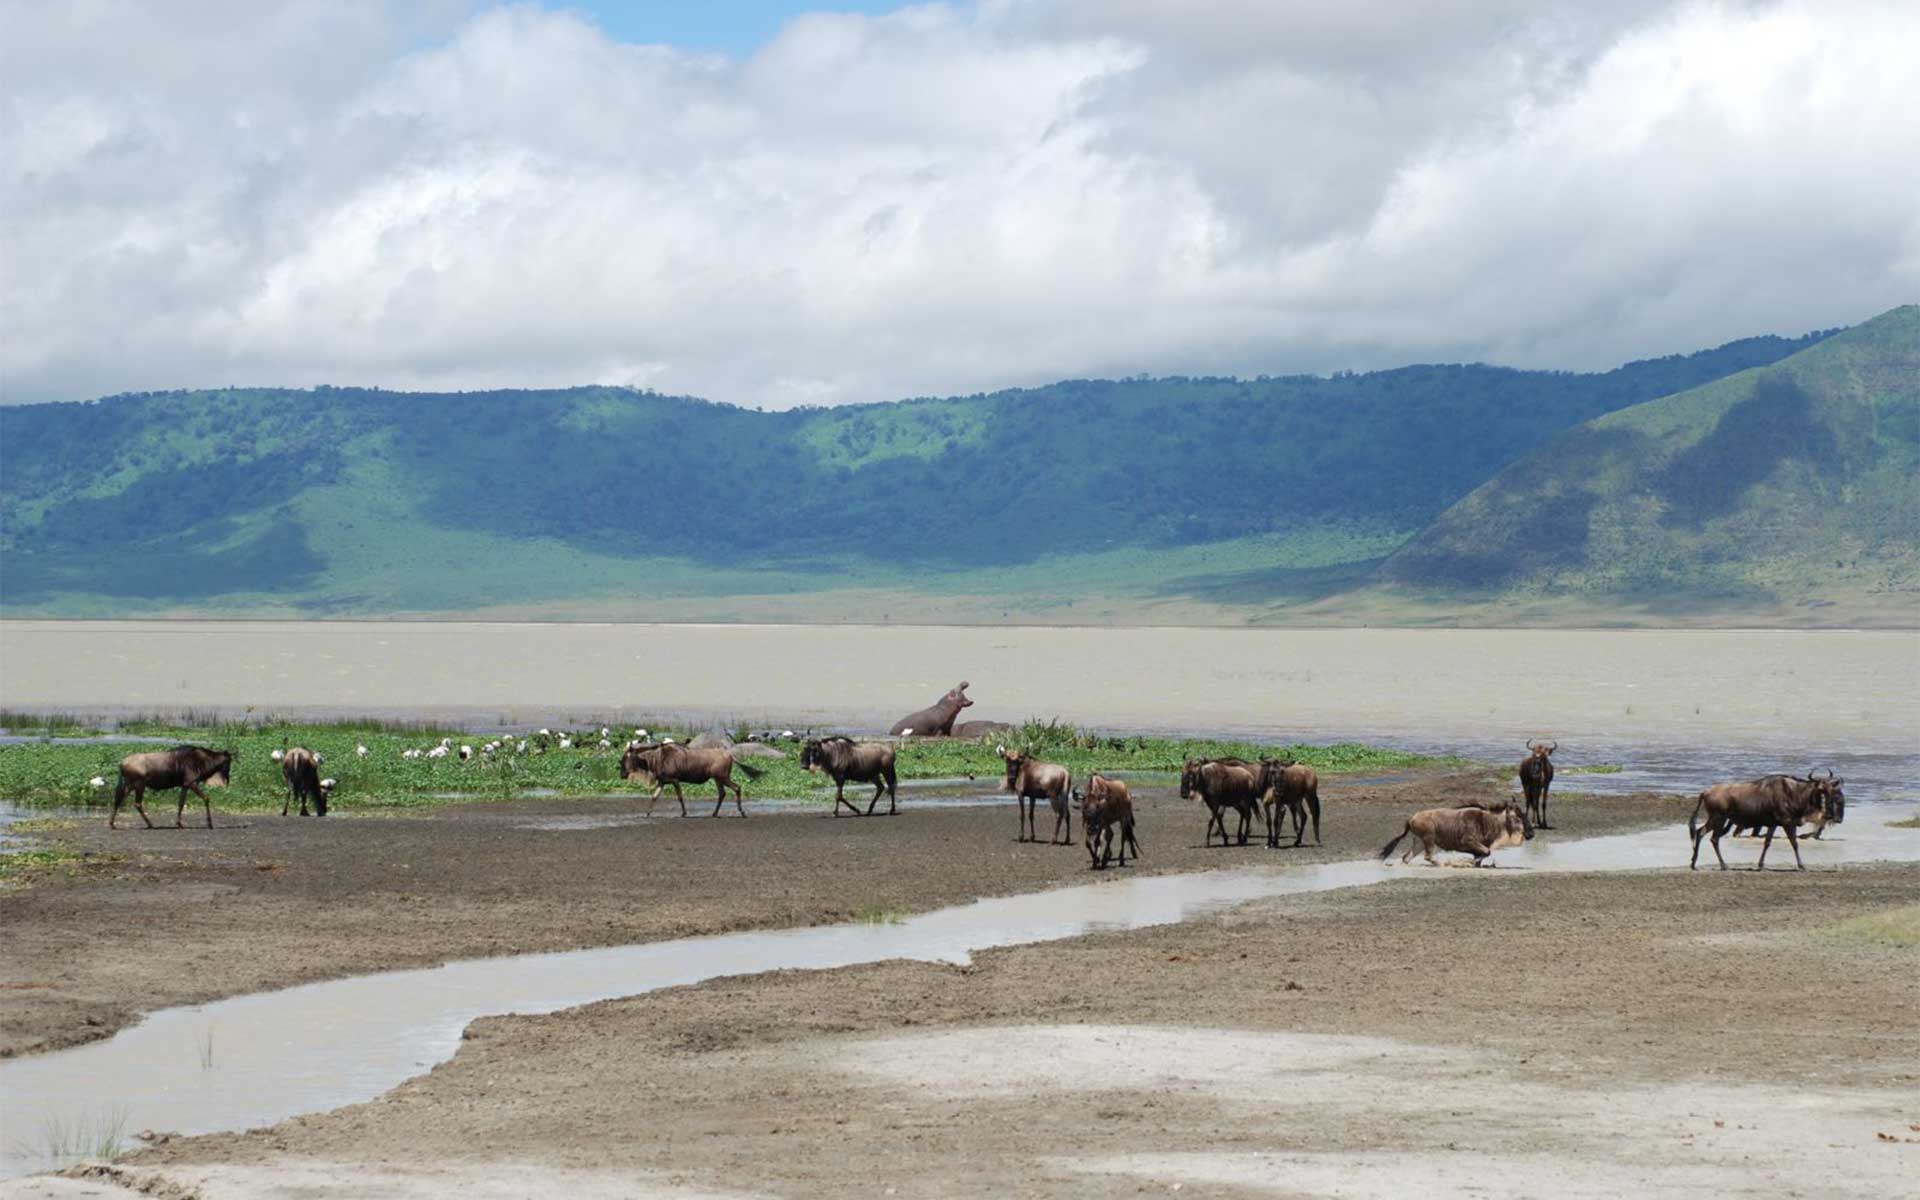 wildebeest grazing at ngorongoro crater conservation area